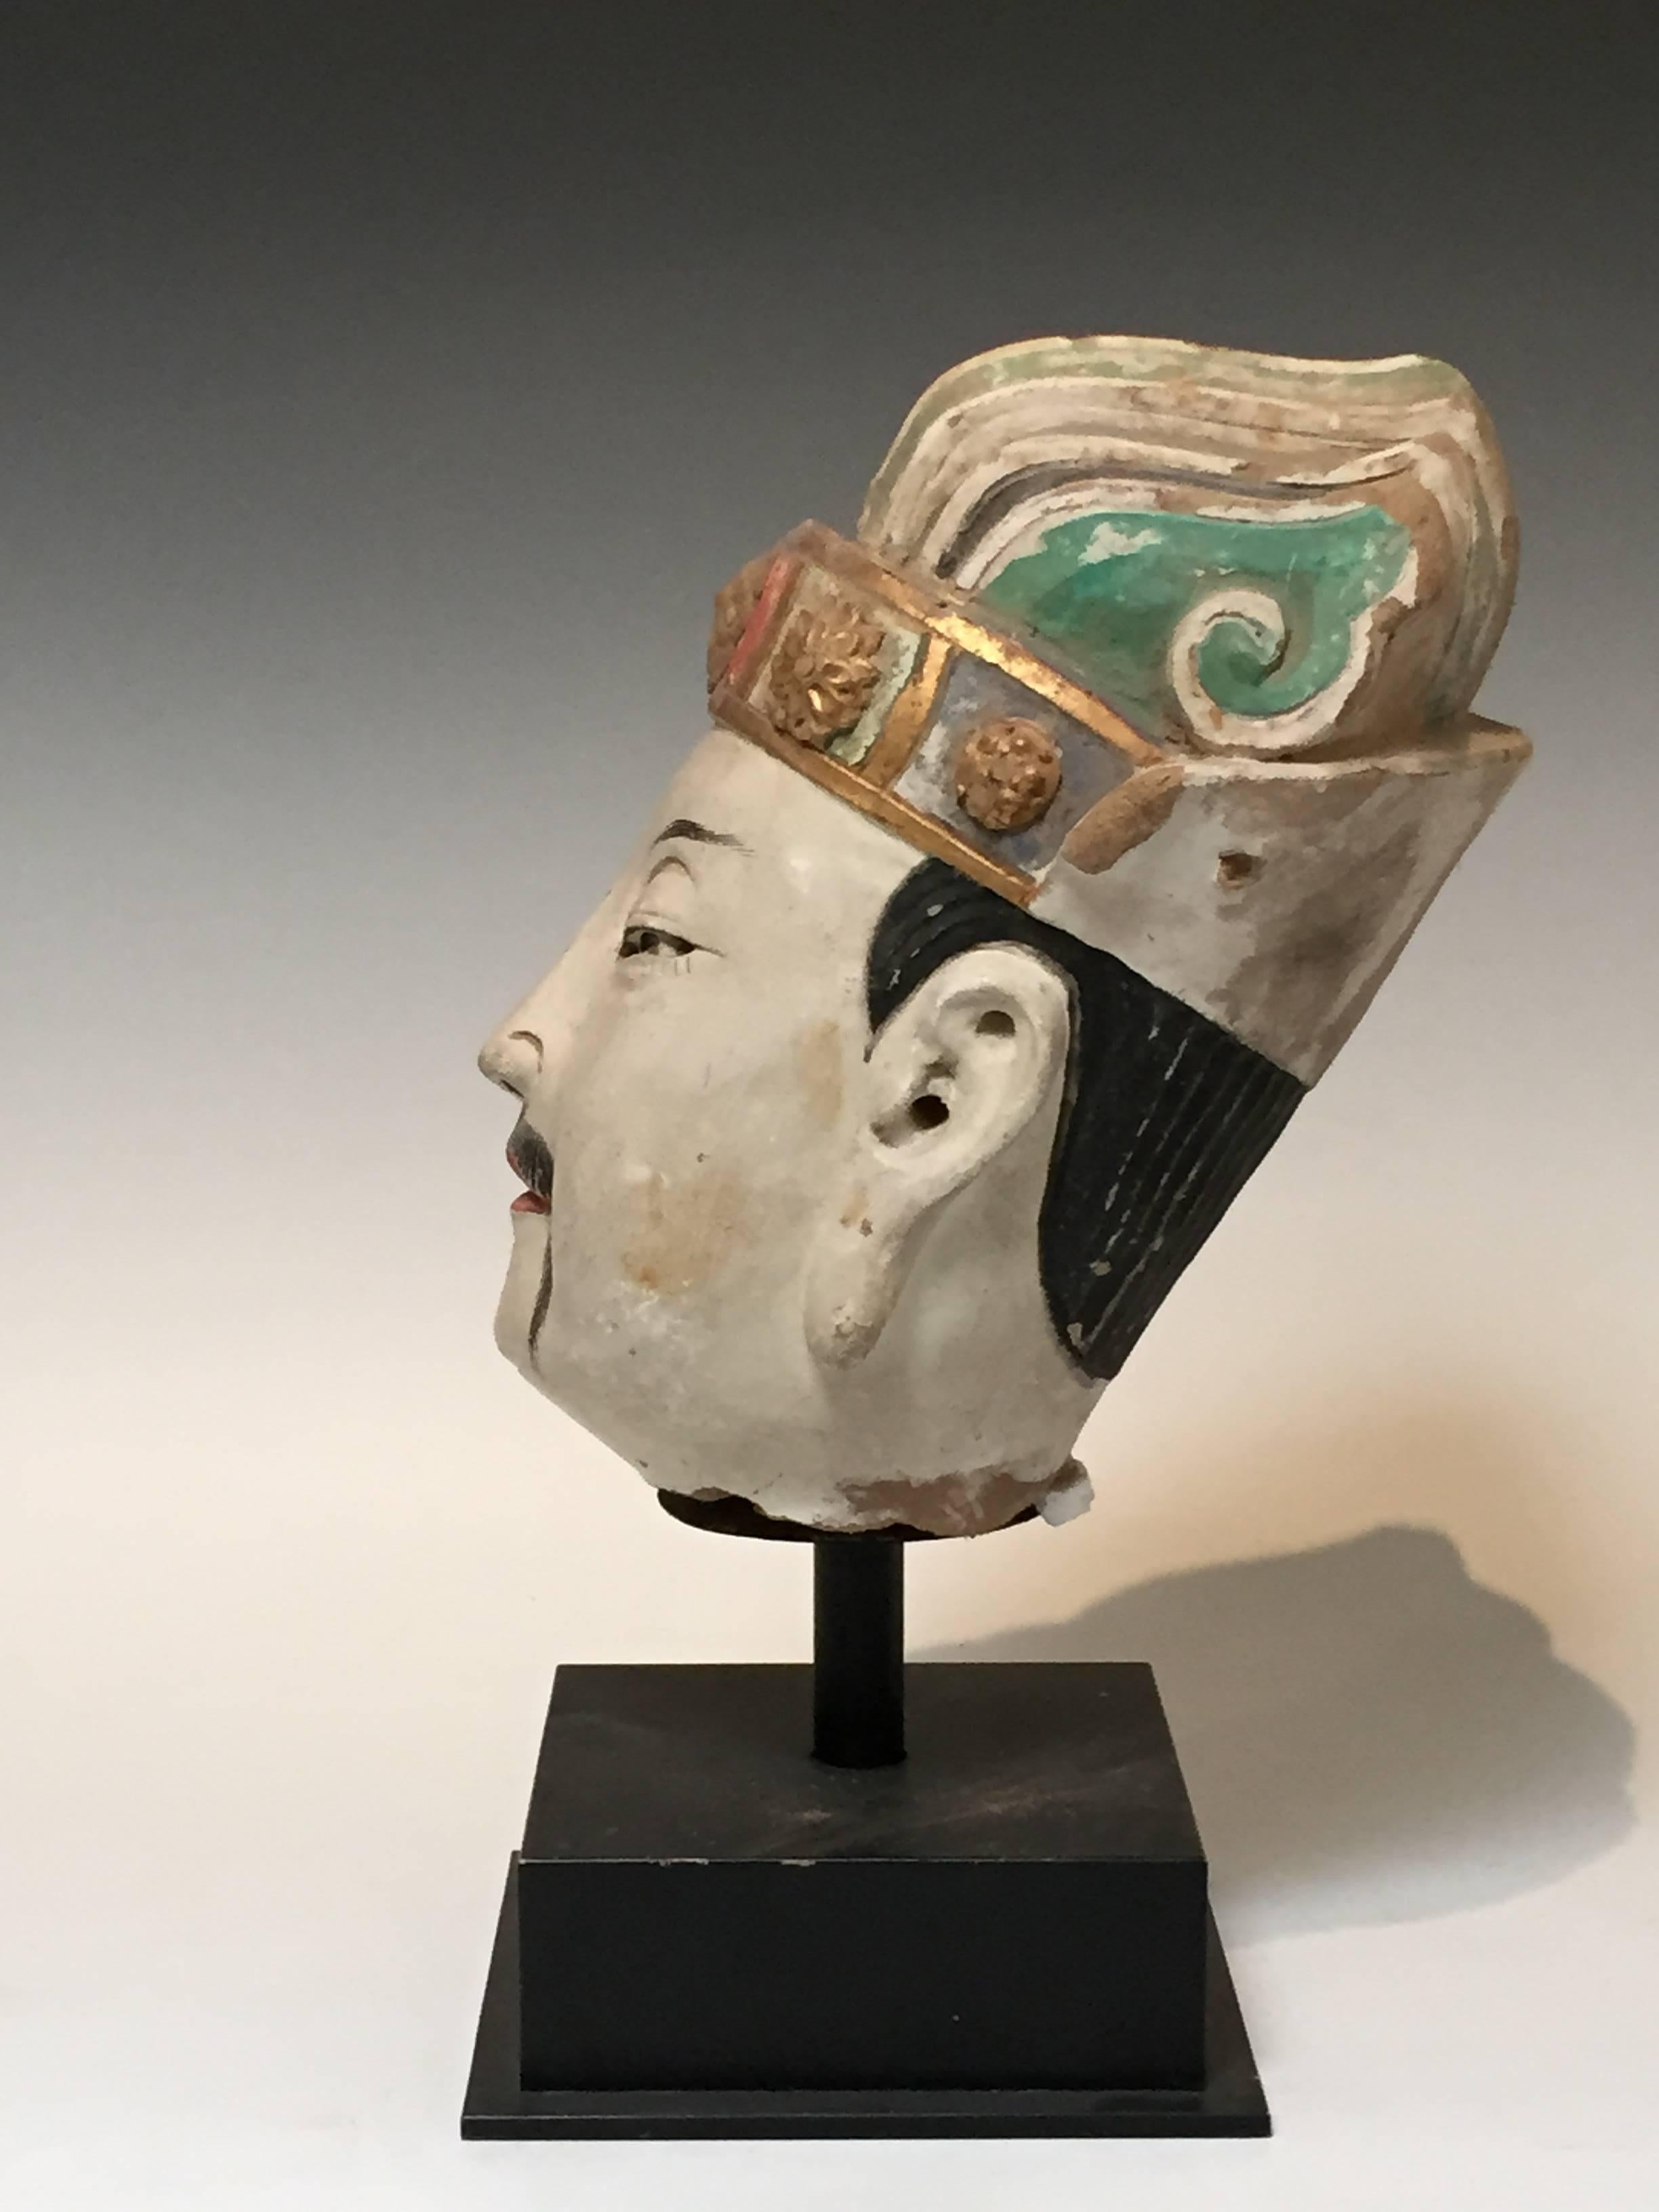 
A 15th century Ming Dynasty Stucco head of an official. 
All original pigments. Made of stucco and wood.
Measures: 16